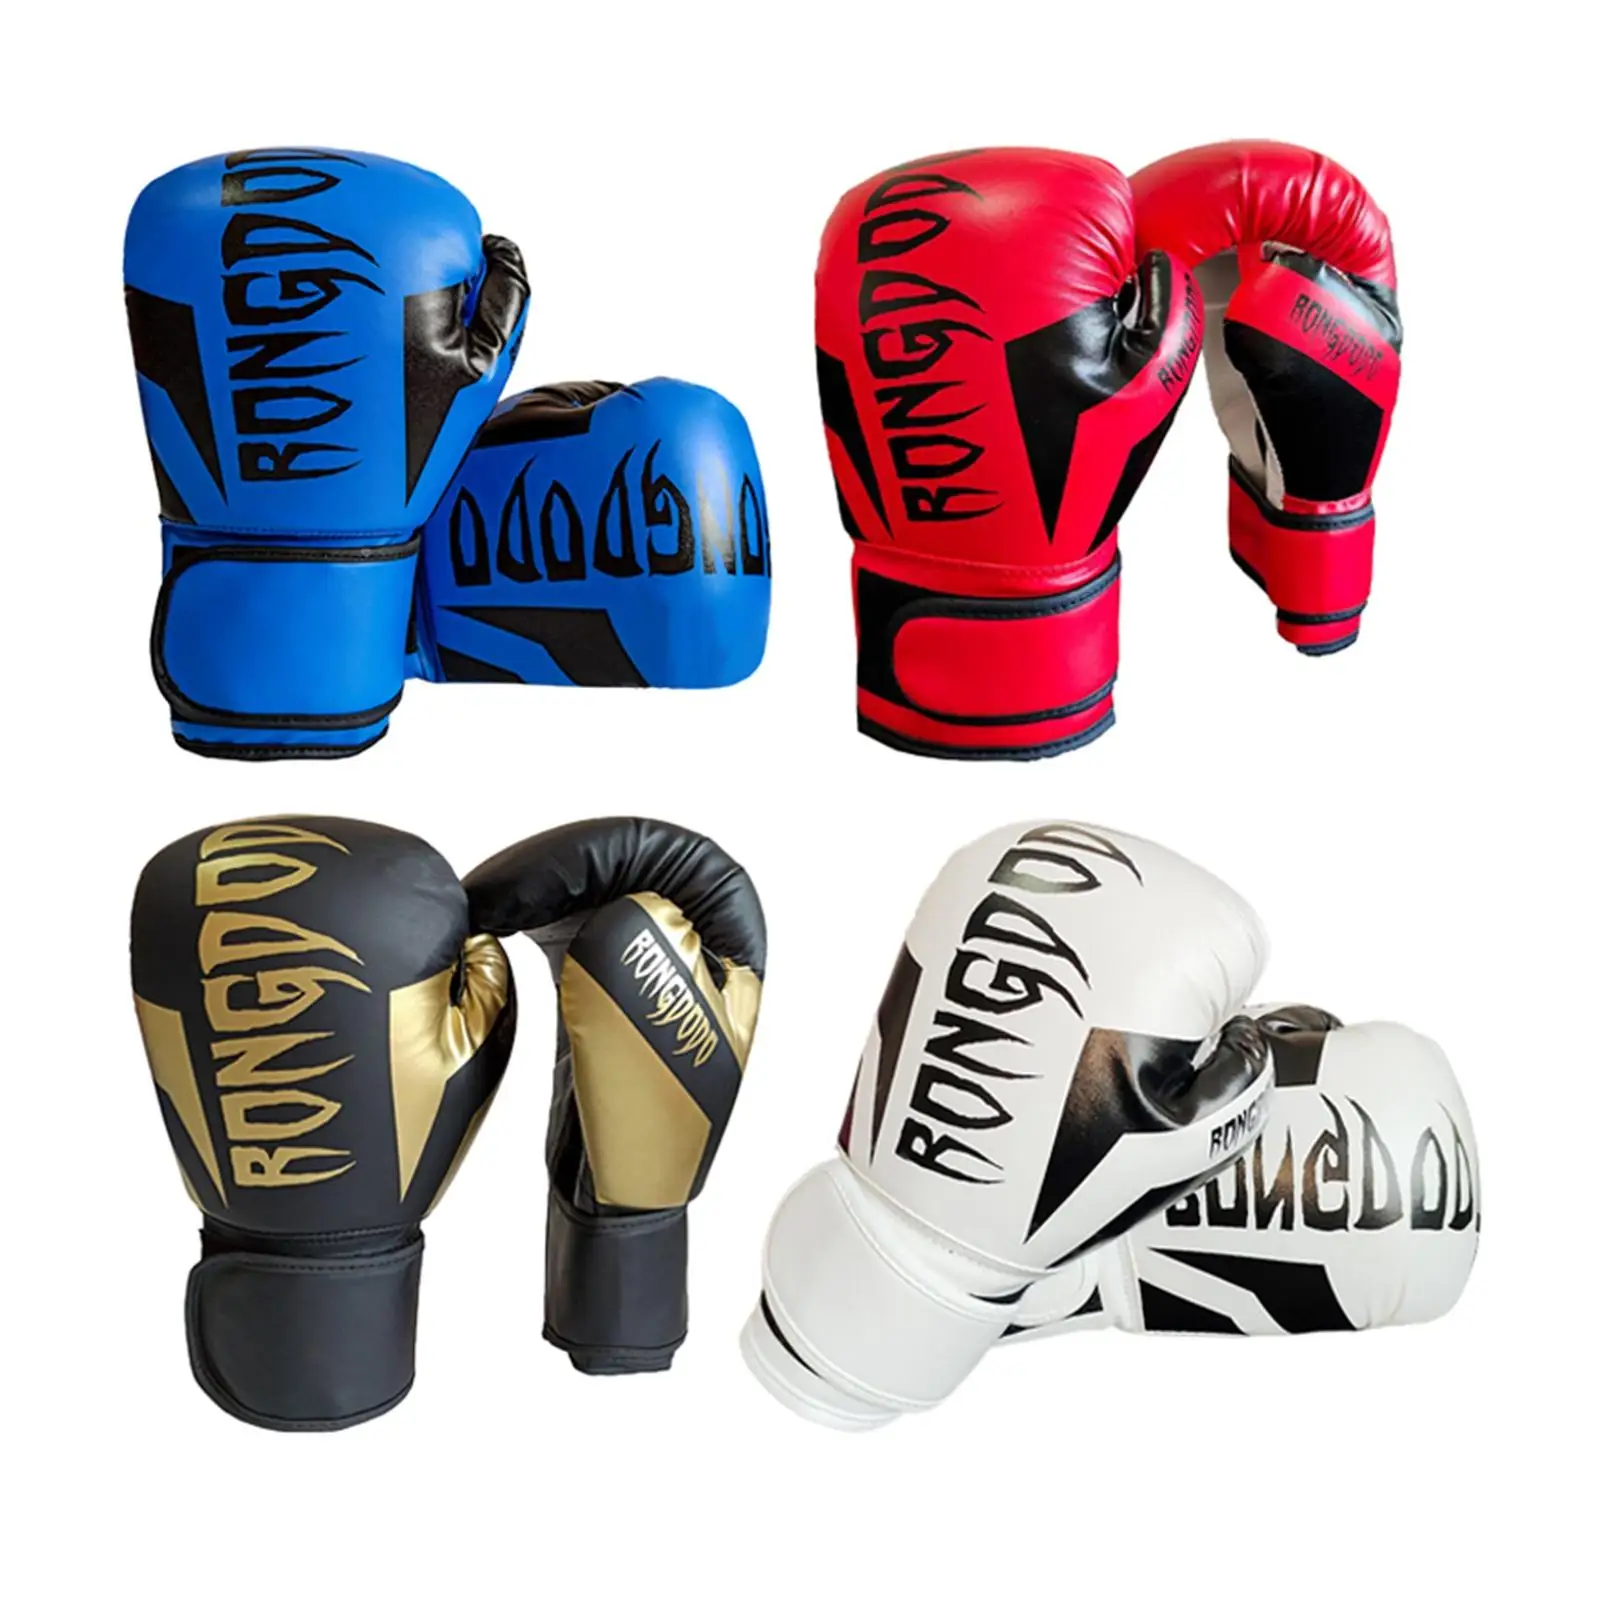 

Boys Kids Boxing Gloves 6oz Lined with Soft Material for Boys and Girls All Purpose Training Anti Strike Thick Easy to Use Mitts